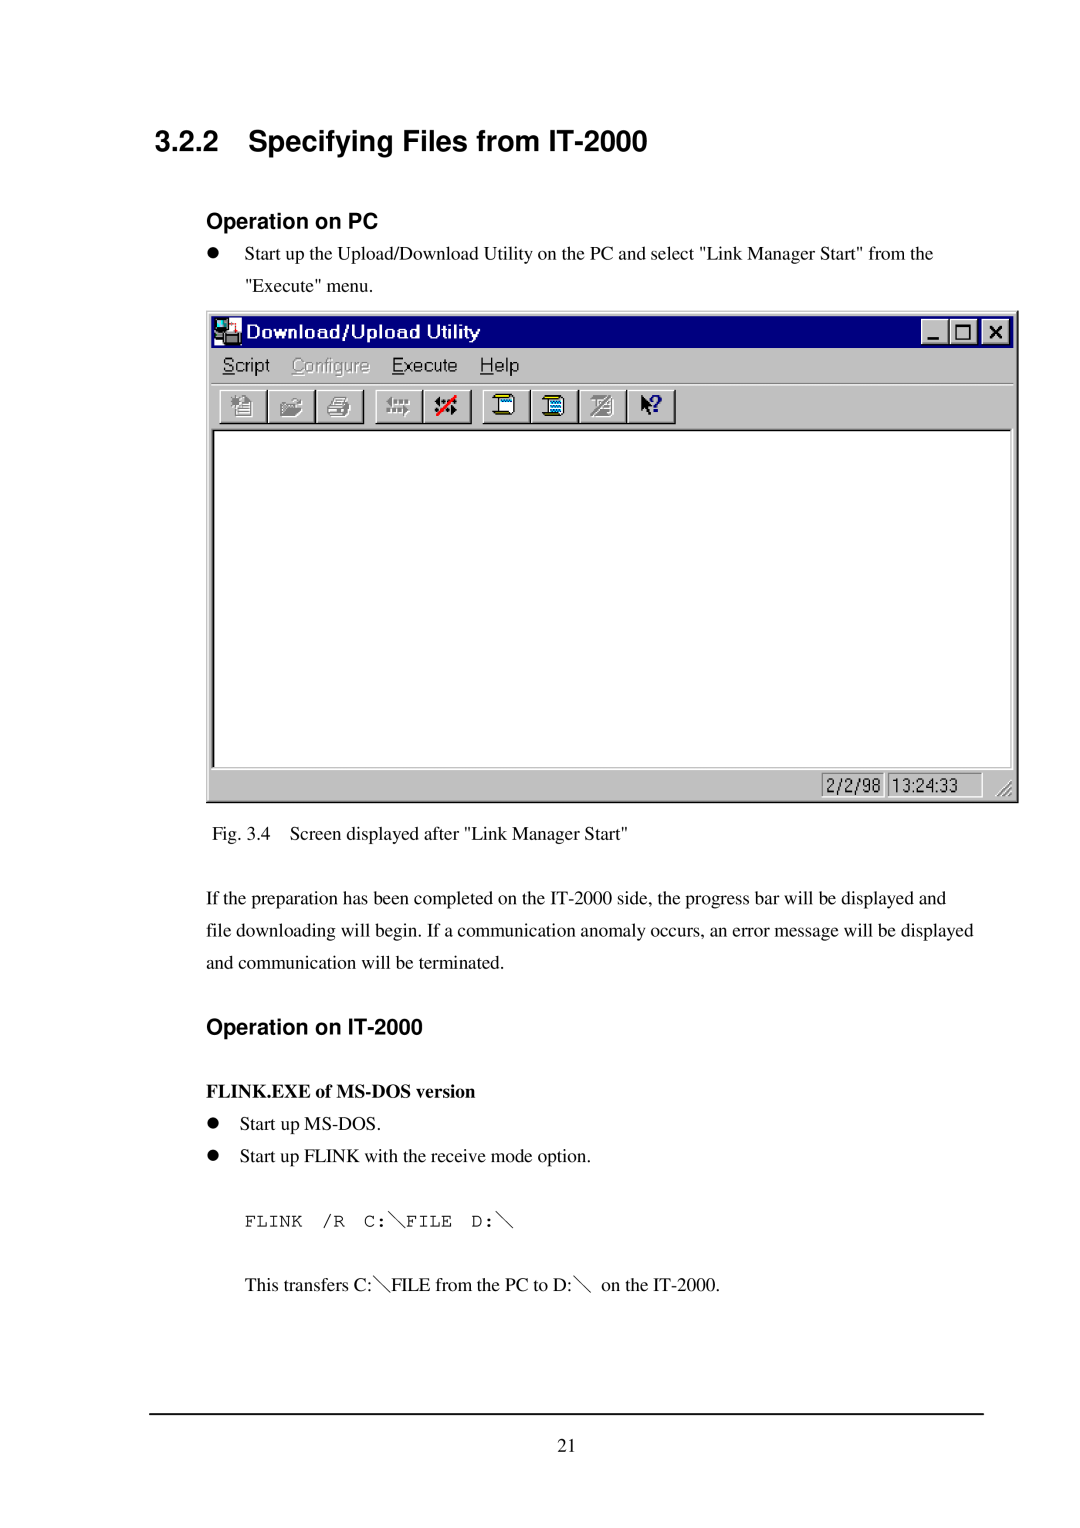 Casio installation manual Specifying Files from IT-2000, Flink /R Cfile D, Operation on PC, Operation on IT-2000 